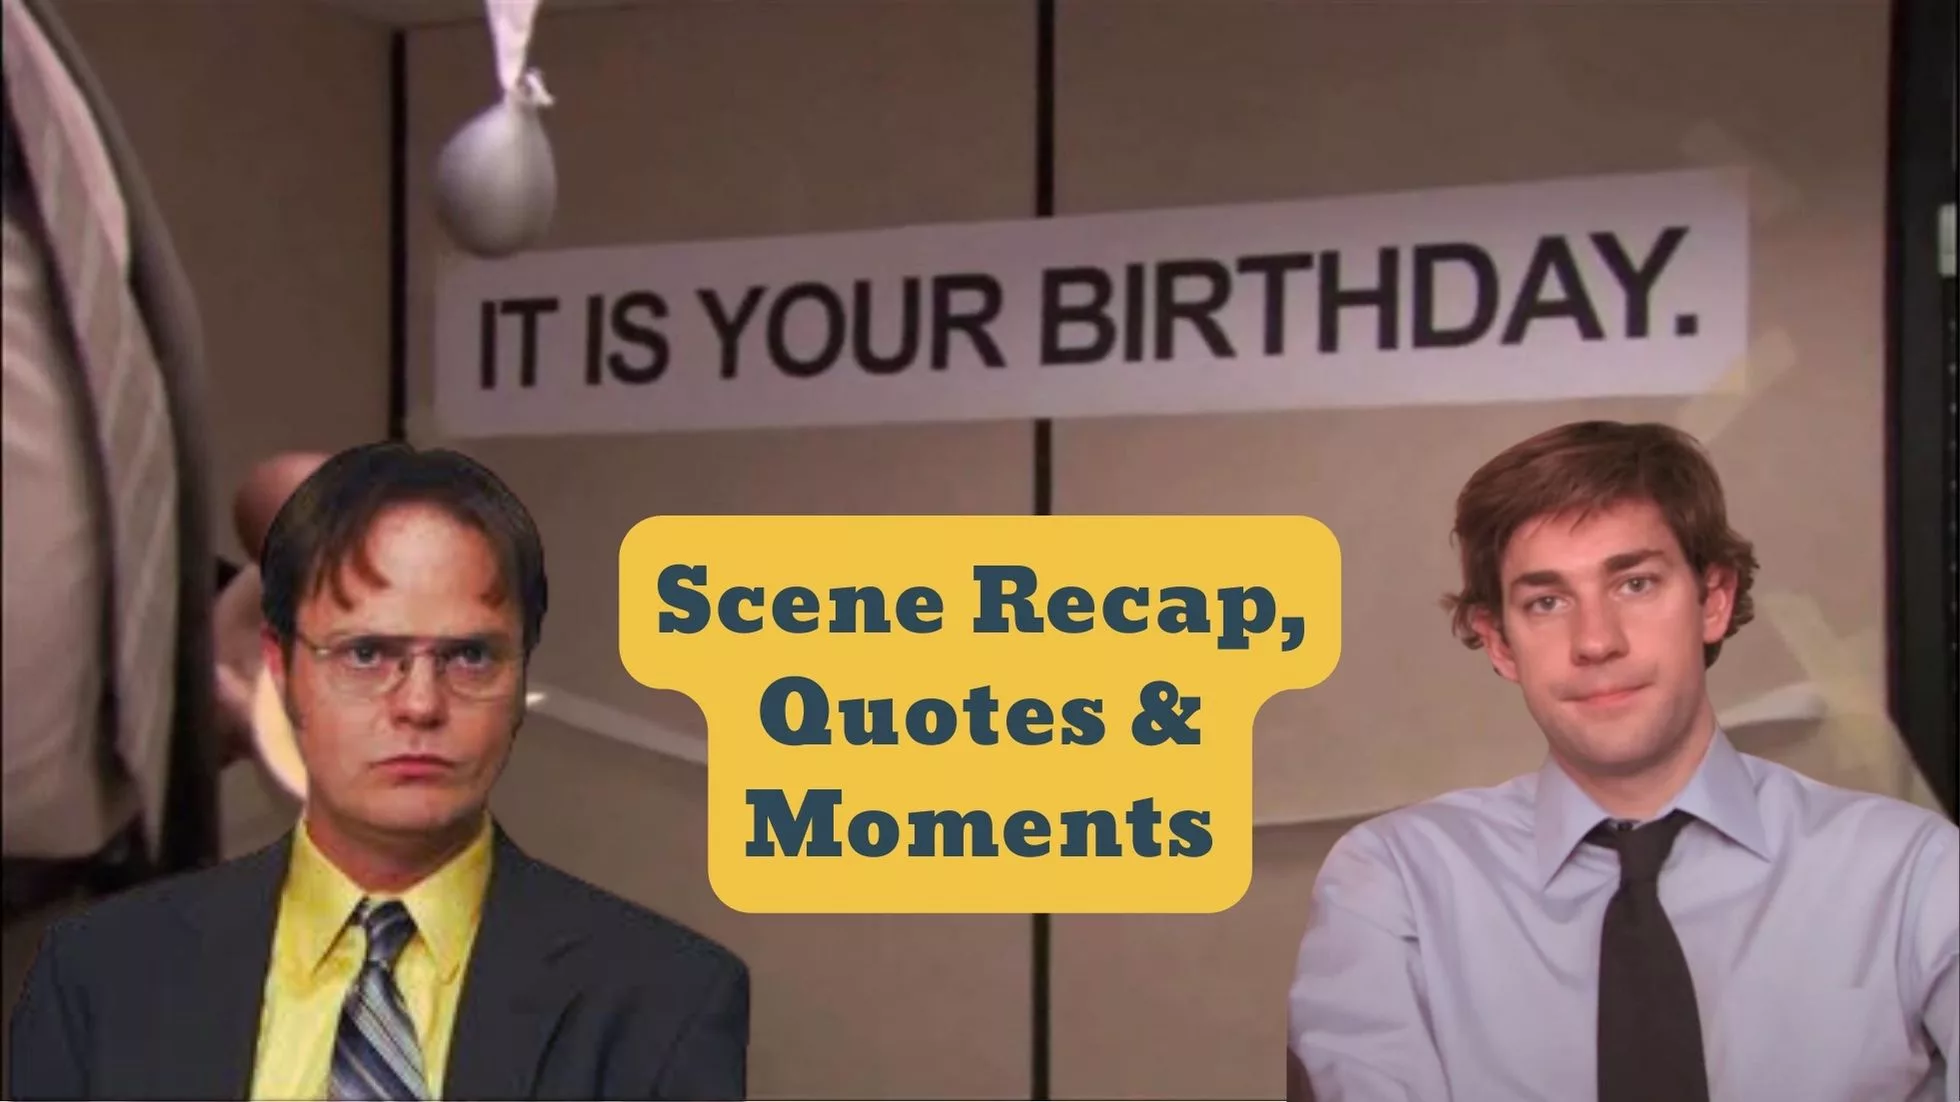 The Best Quotes and Moments from The Office's 'It is Your